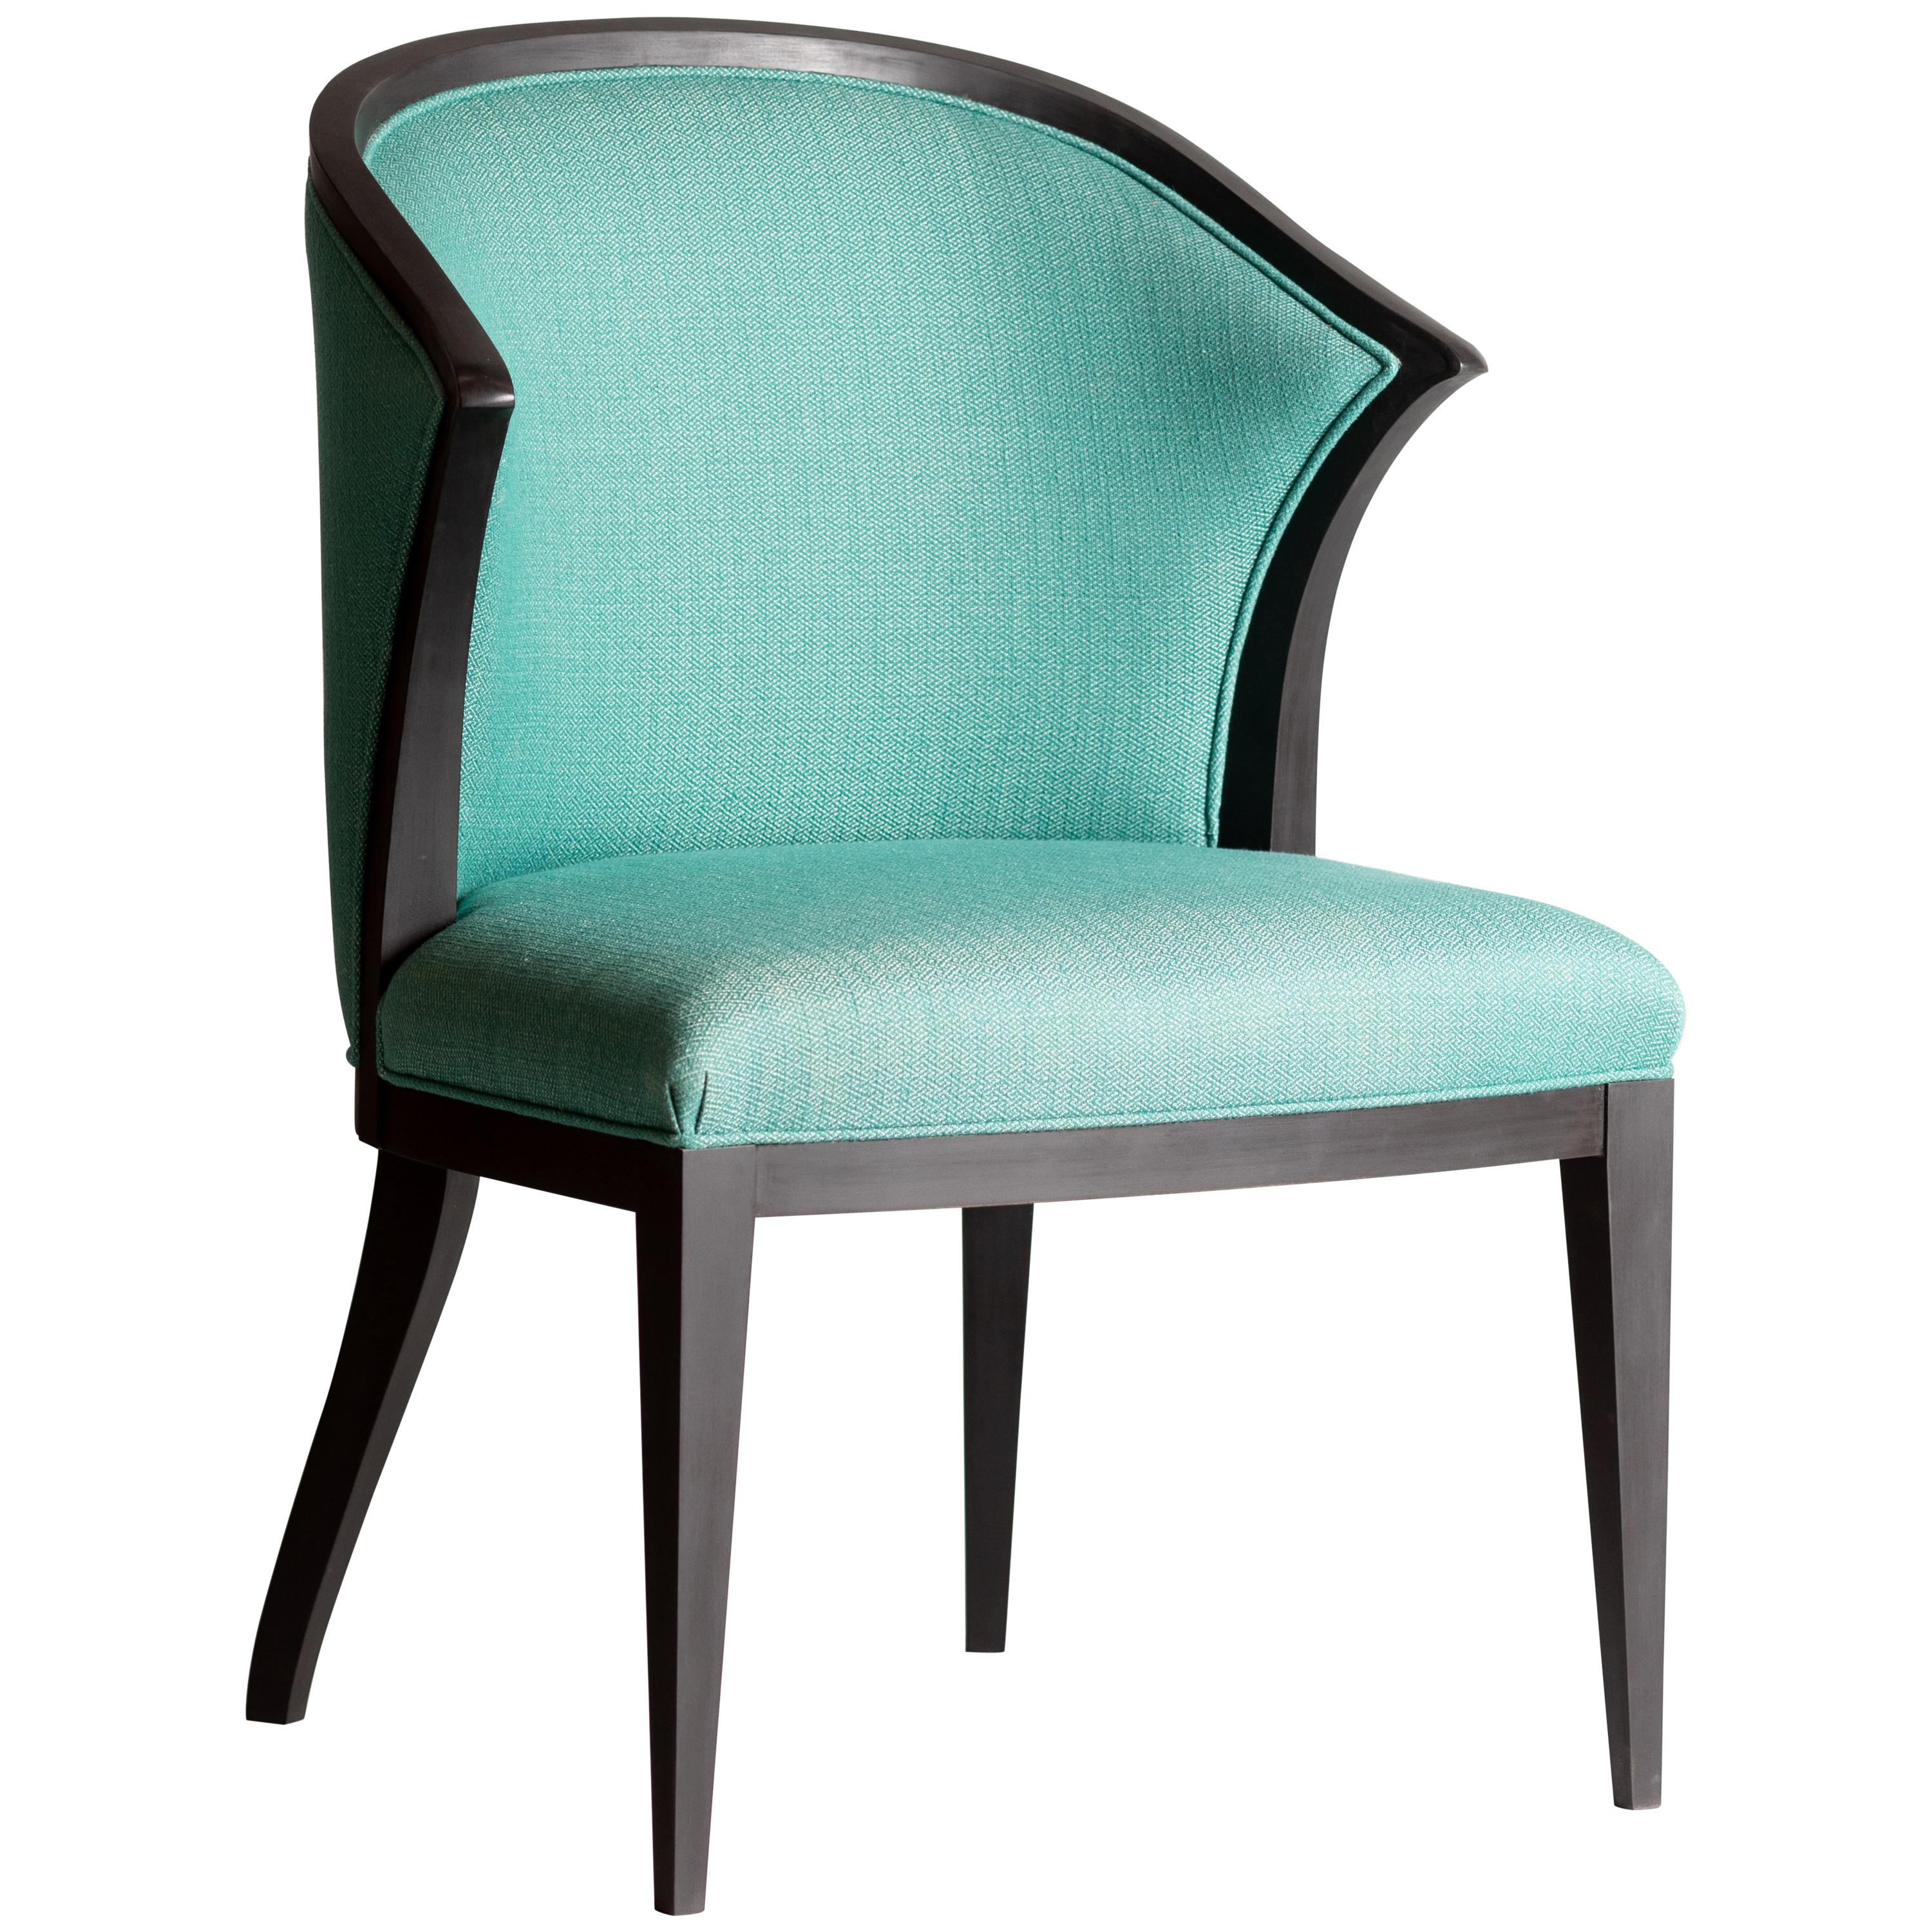 Contemporary Bergère Armchair or Desk Chair with Round Back and Upholstery